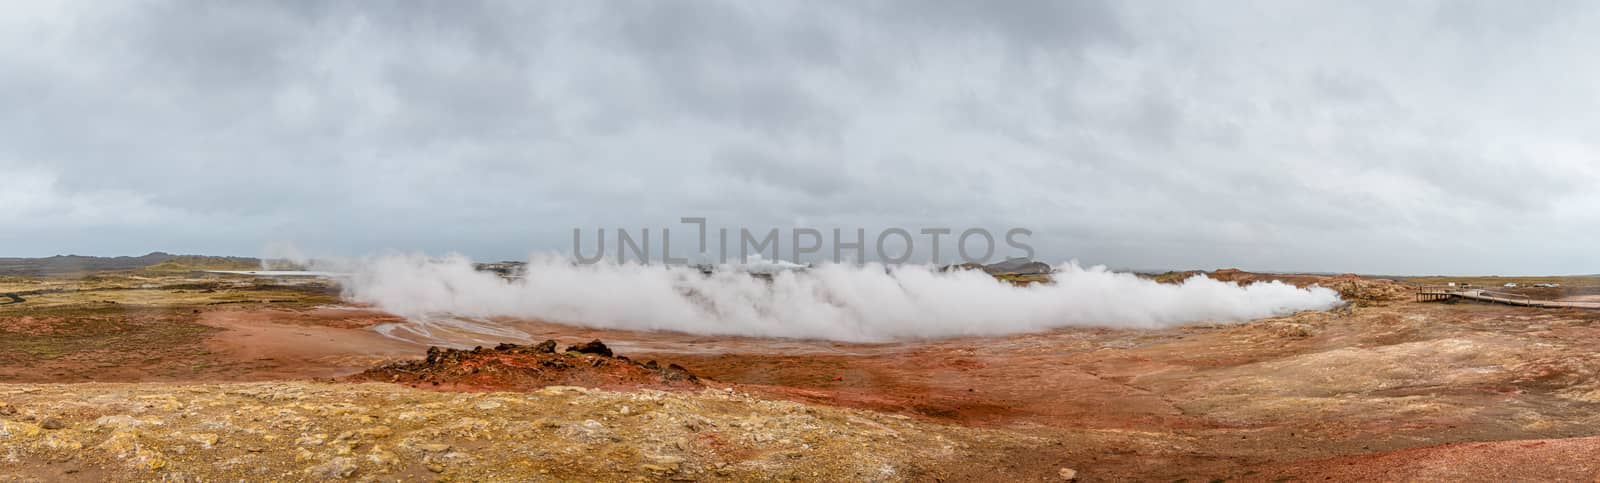 Geo Thermal hot spring activity in Iceland Gunnuhver Hot Springs steam cloud during storm by MXW_Stock